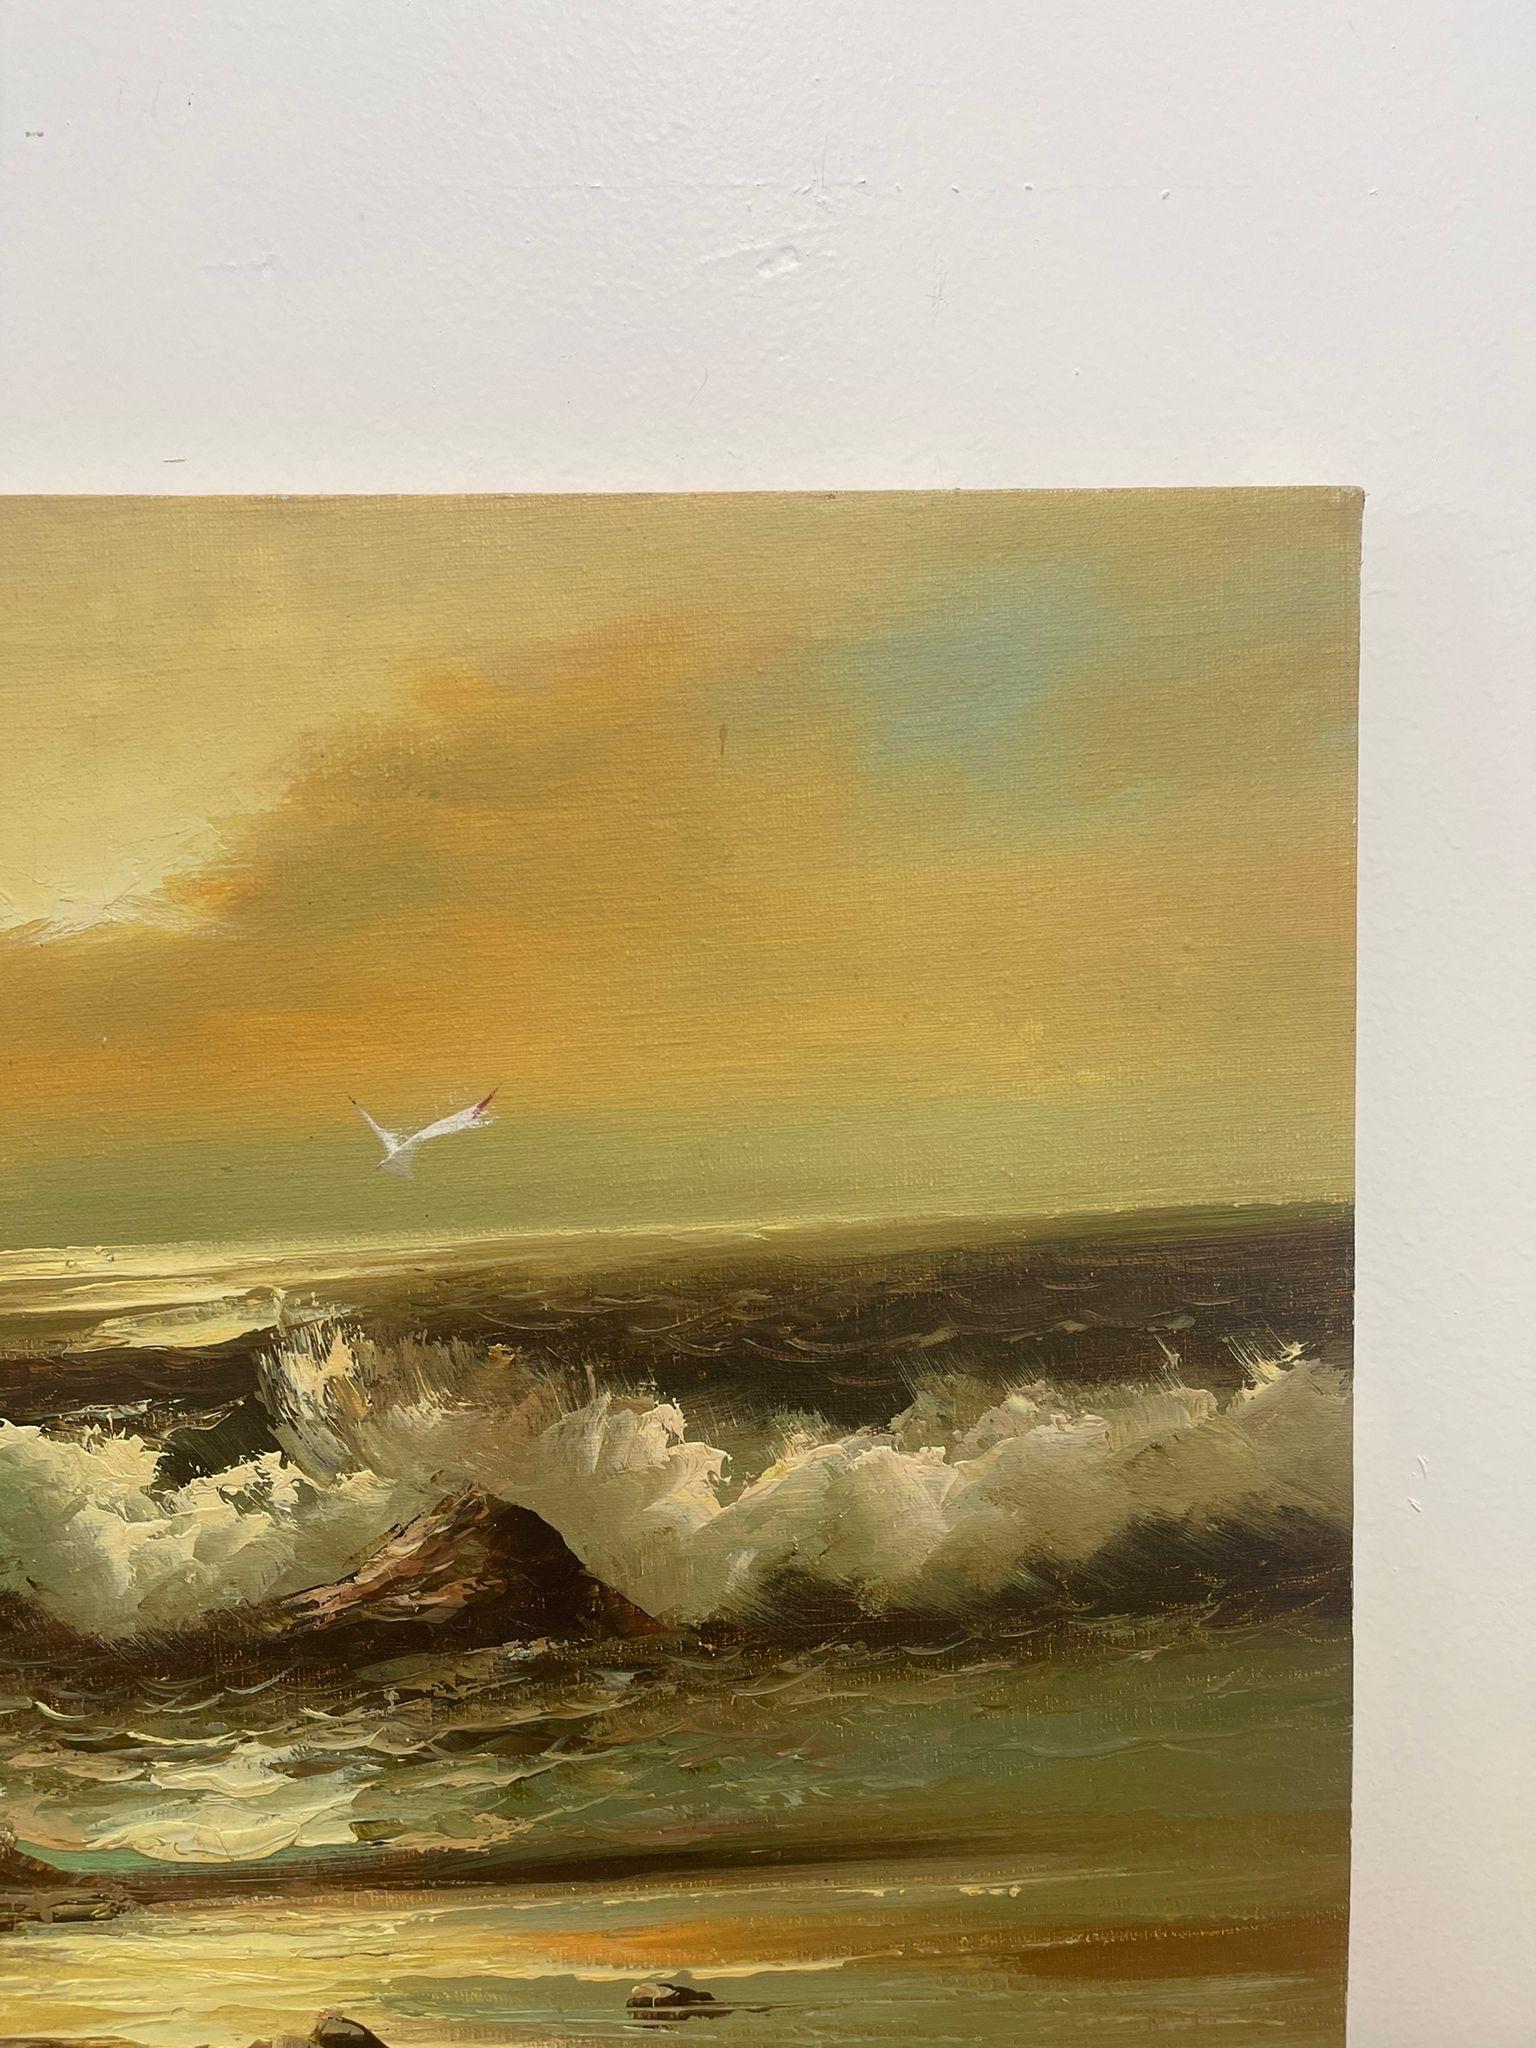 Late 20th Century Vintage Original Signed Seascape Painting on Canvas